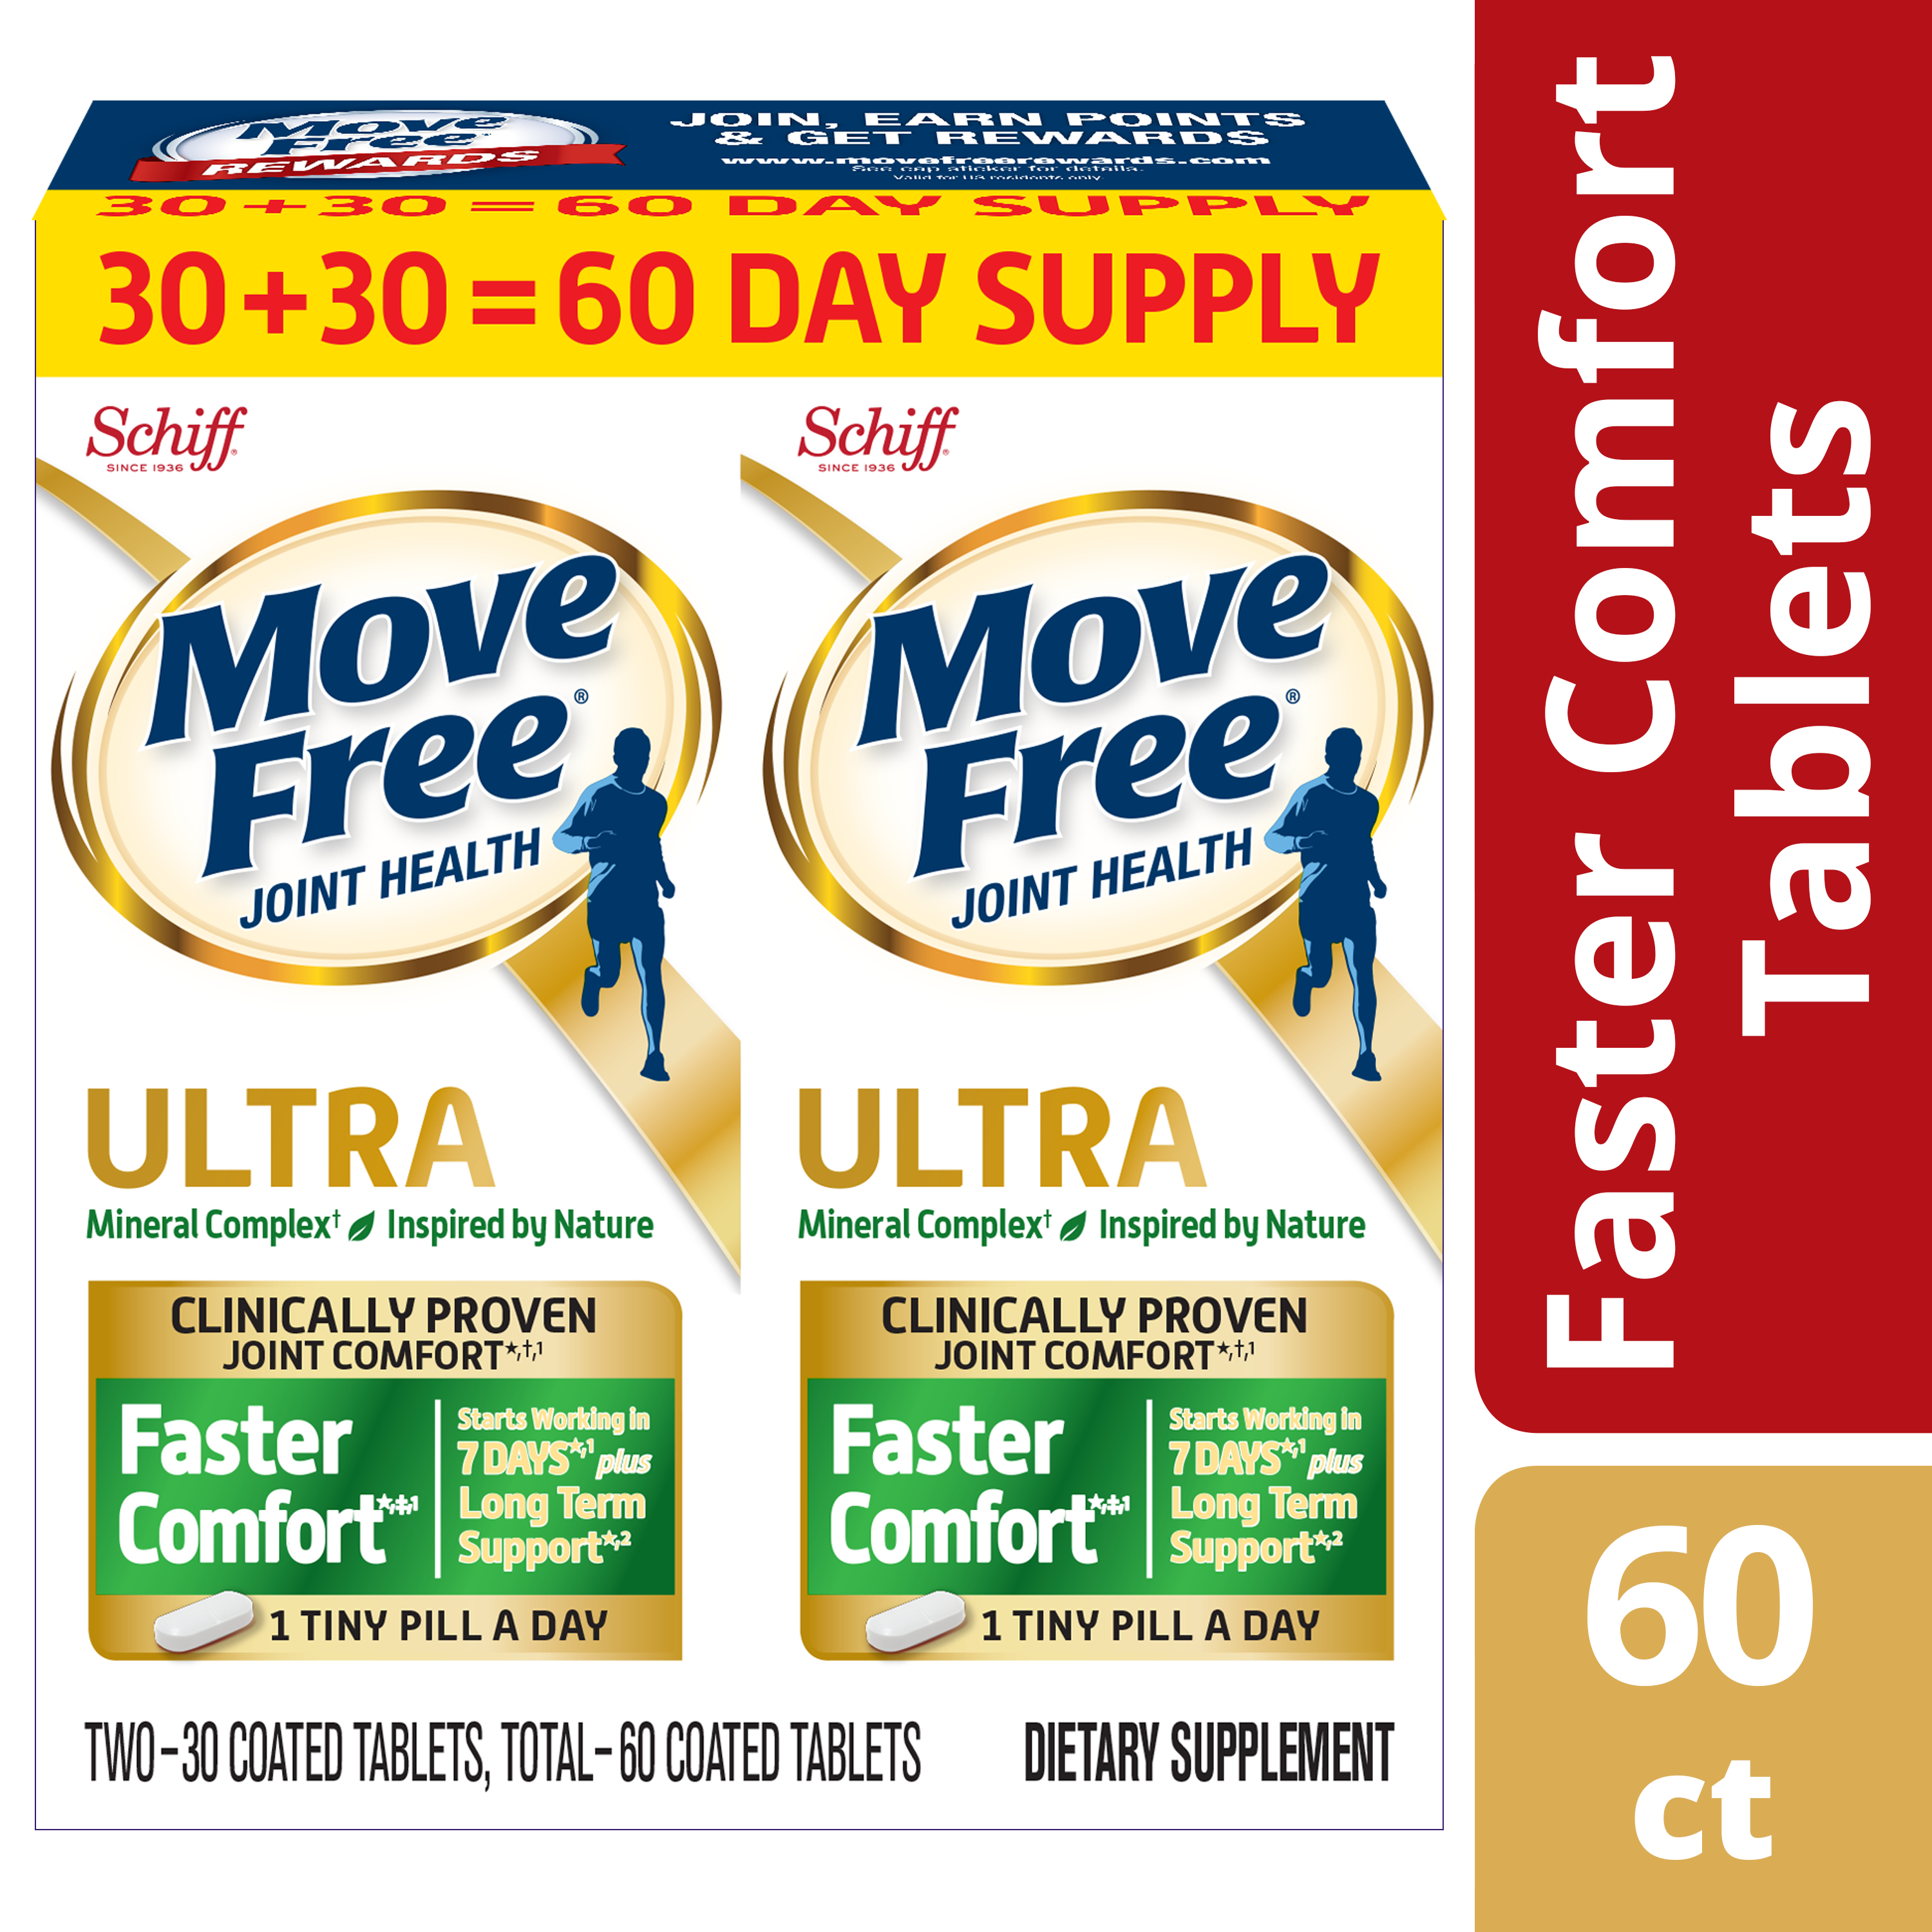 Move Free Ultra Faster Comfort Joint Support Tablets, 60 count - Calcium Fructoborate, For Clinically Proven Joint Comfort, 1 Tiny Pill Per Day - image 1 of 14